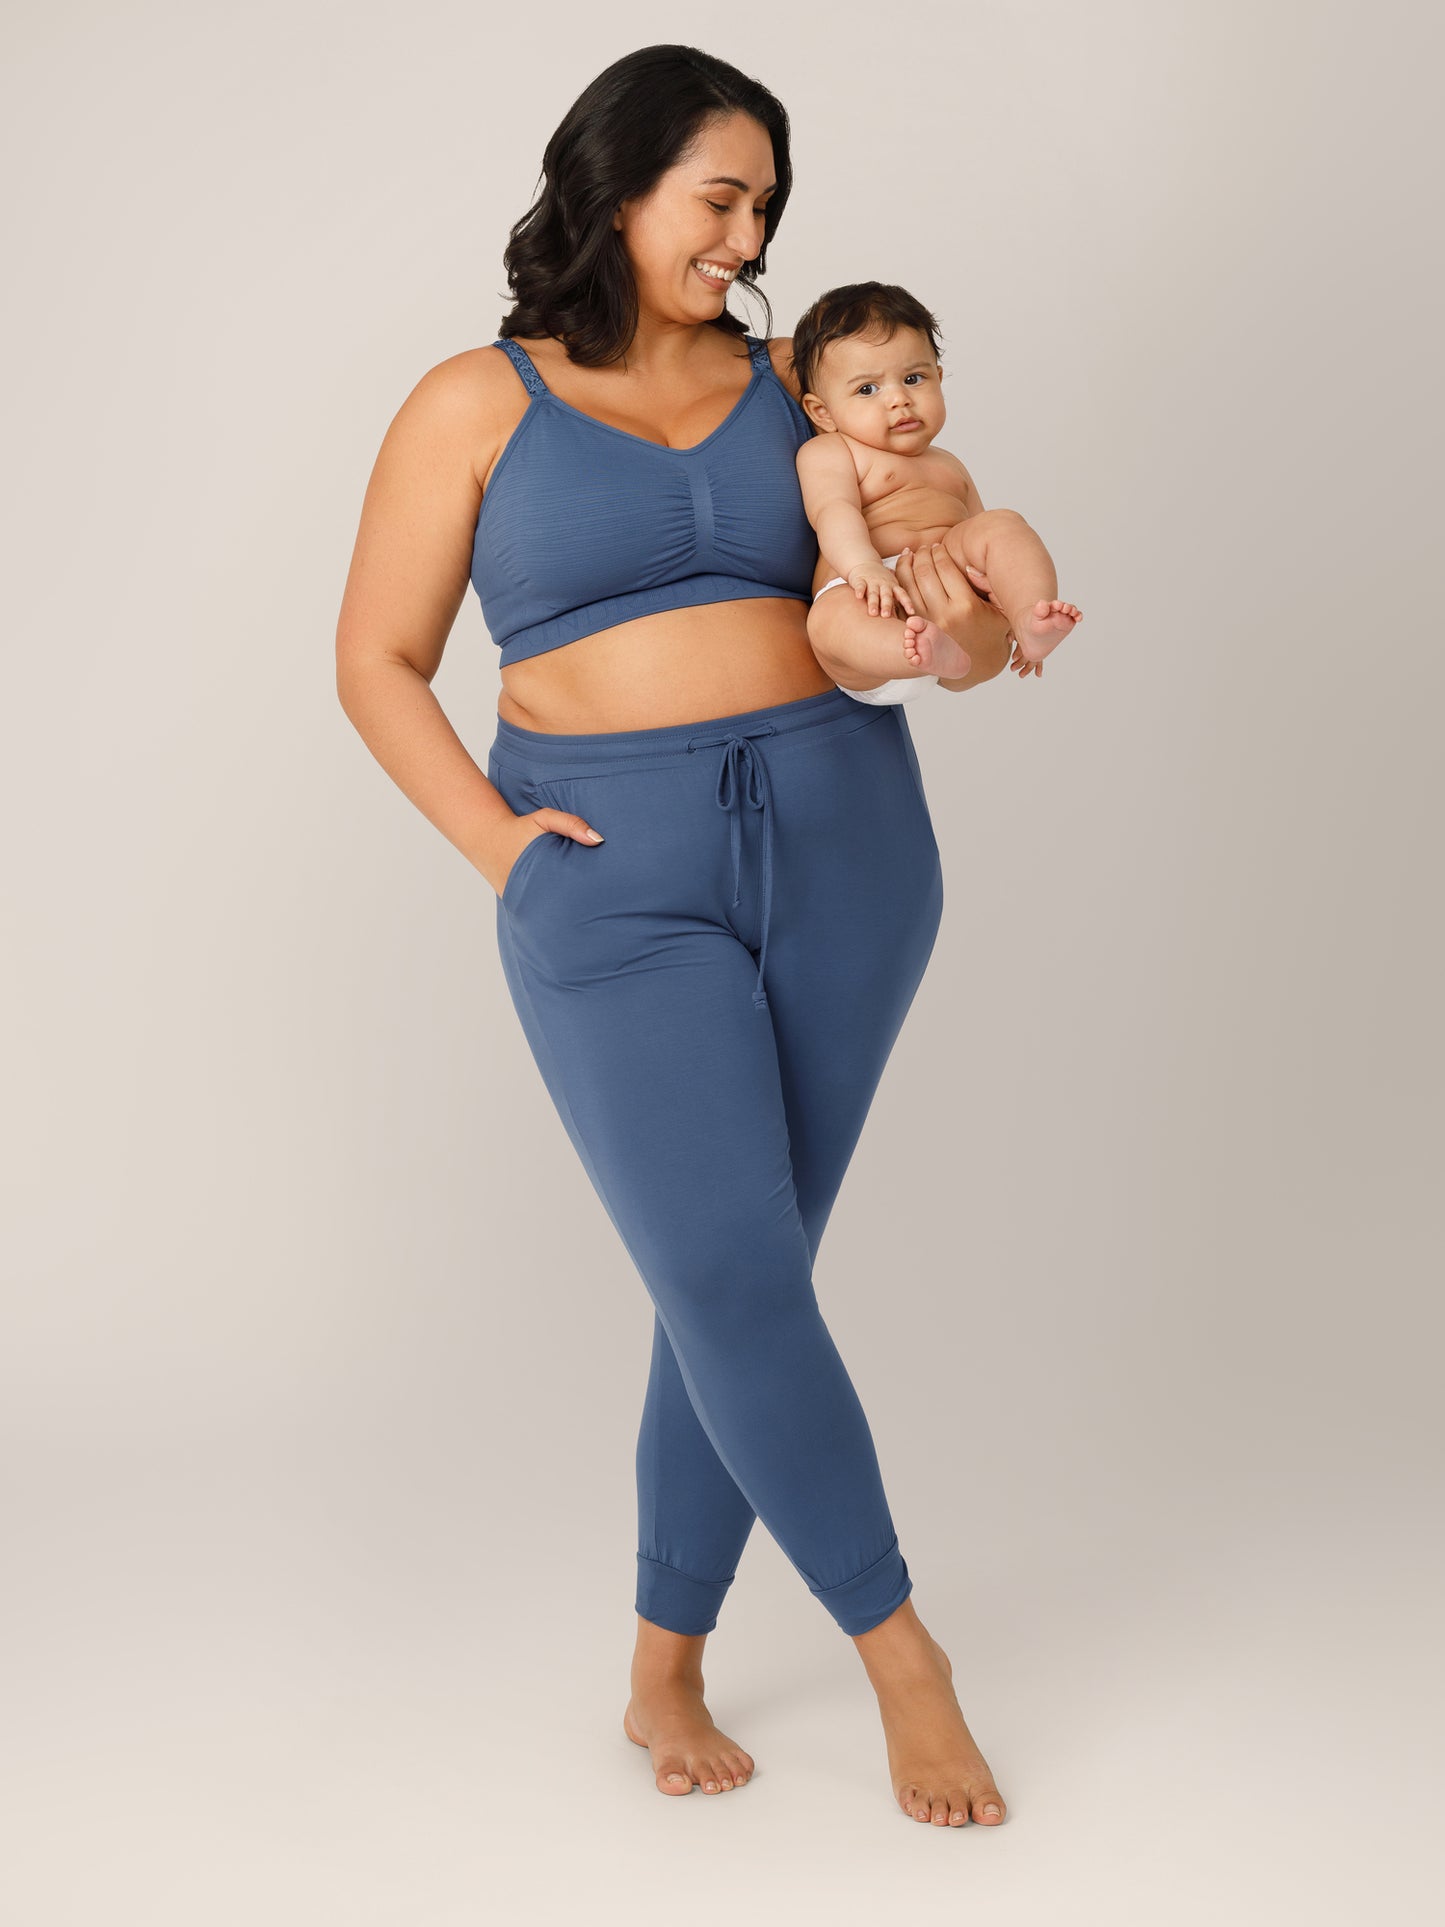 Front view of model wearing the Sublime® Hands-Free Pumping & Nursing Bra in Slate Blue in a Busty fit paired with matching Everyday Lounge Jogger, and holder baby in one arm.